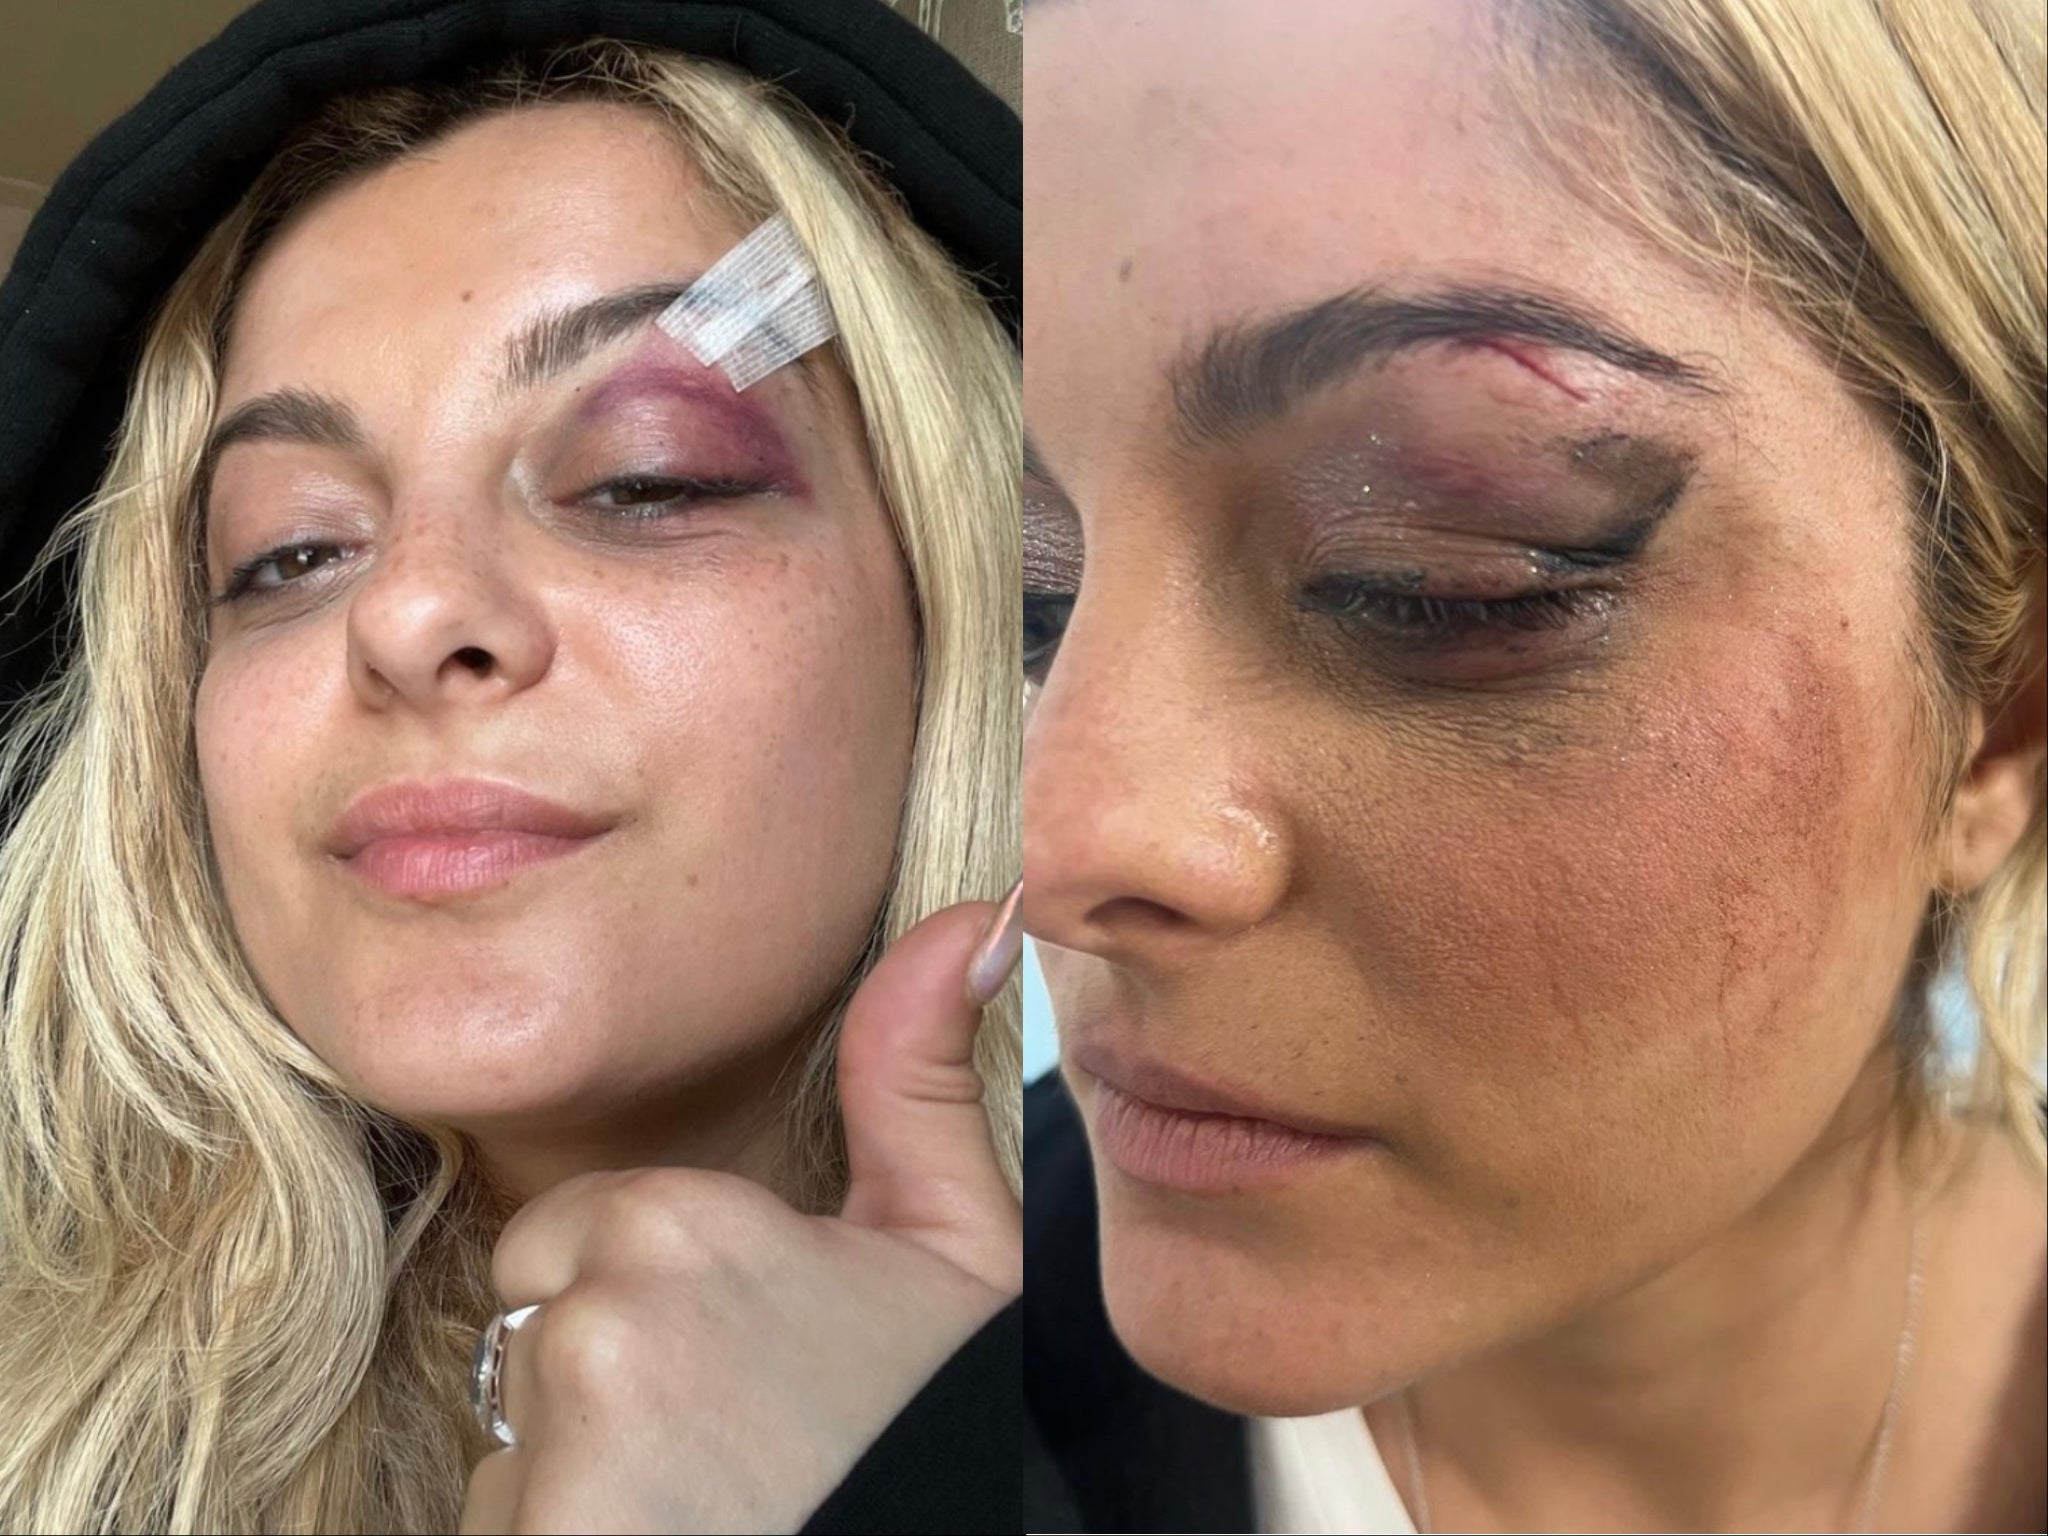 Bebe Rexha shows her injuries on Instagram